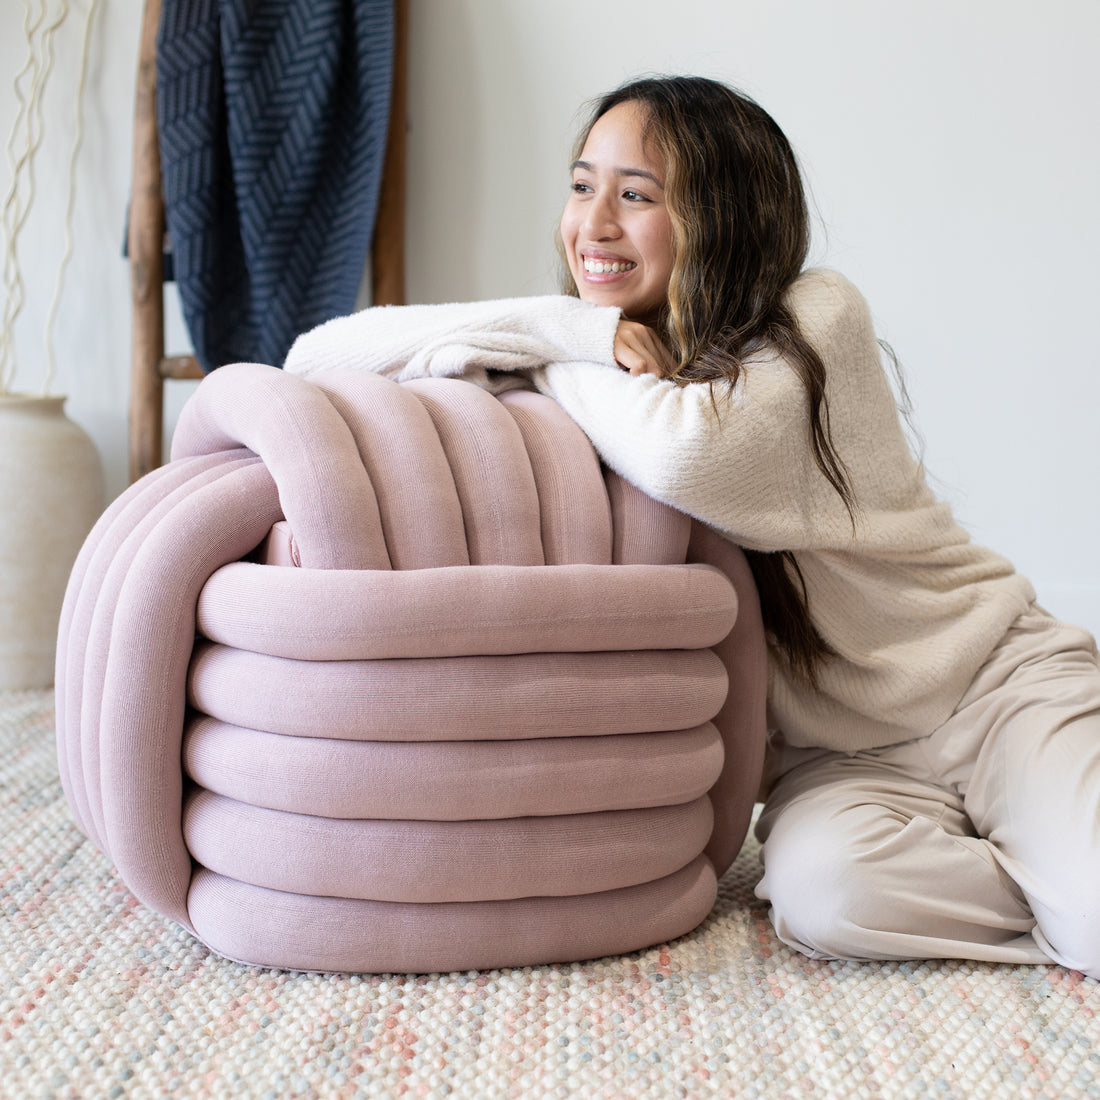 Knotted pouf - Large - Pale pink